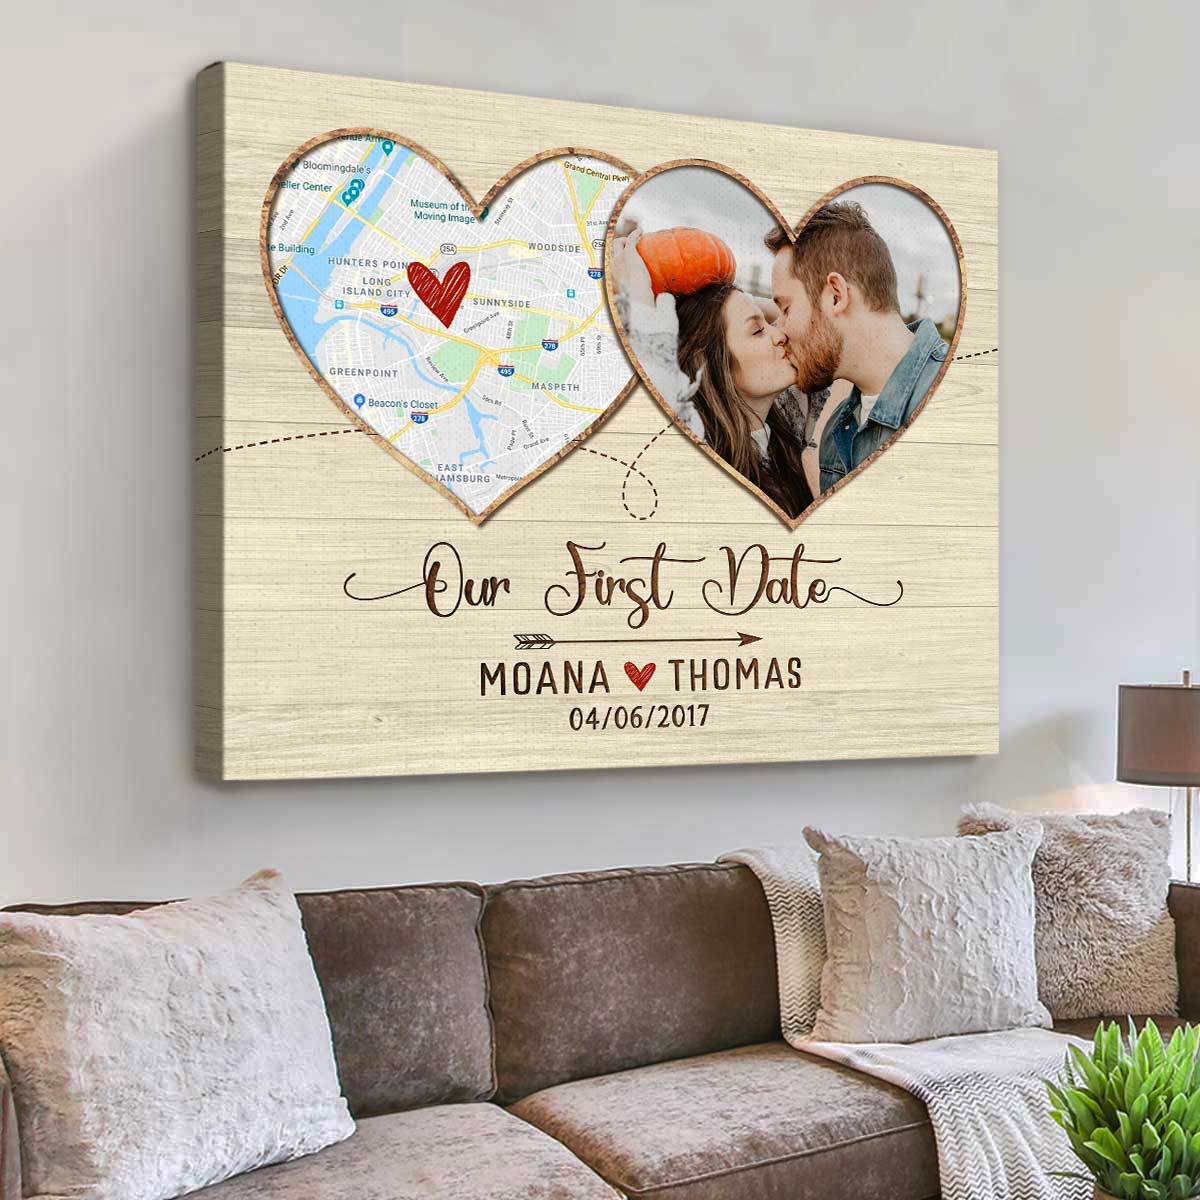 Buy Valentine Gifts for Boyfriend Girlfriend White Couple Lovestory Love  Date Heart 12X12 Printed Filled Cushion & Ceramic Mug Gift for Him Her Wife  Husband Fiance Spouse Birthday Anniversary Everyday Gifting Online